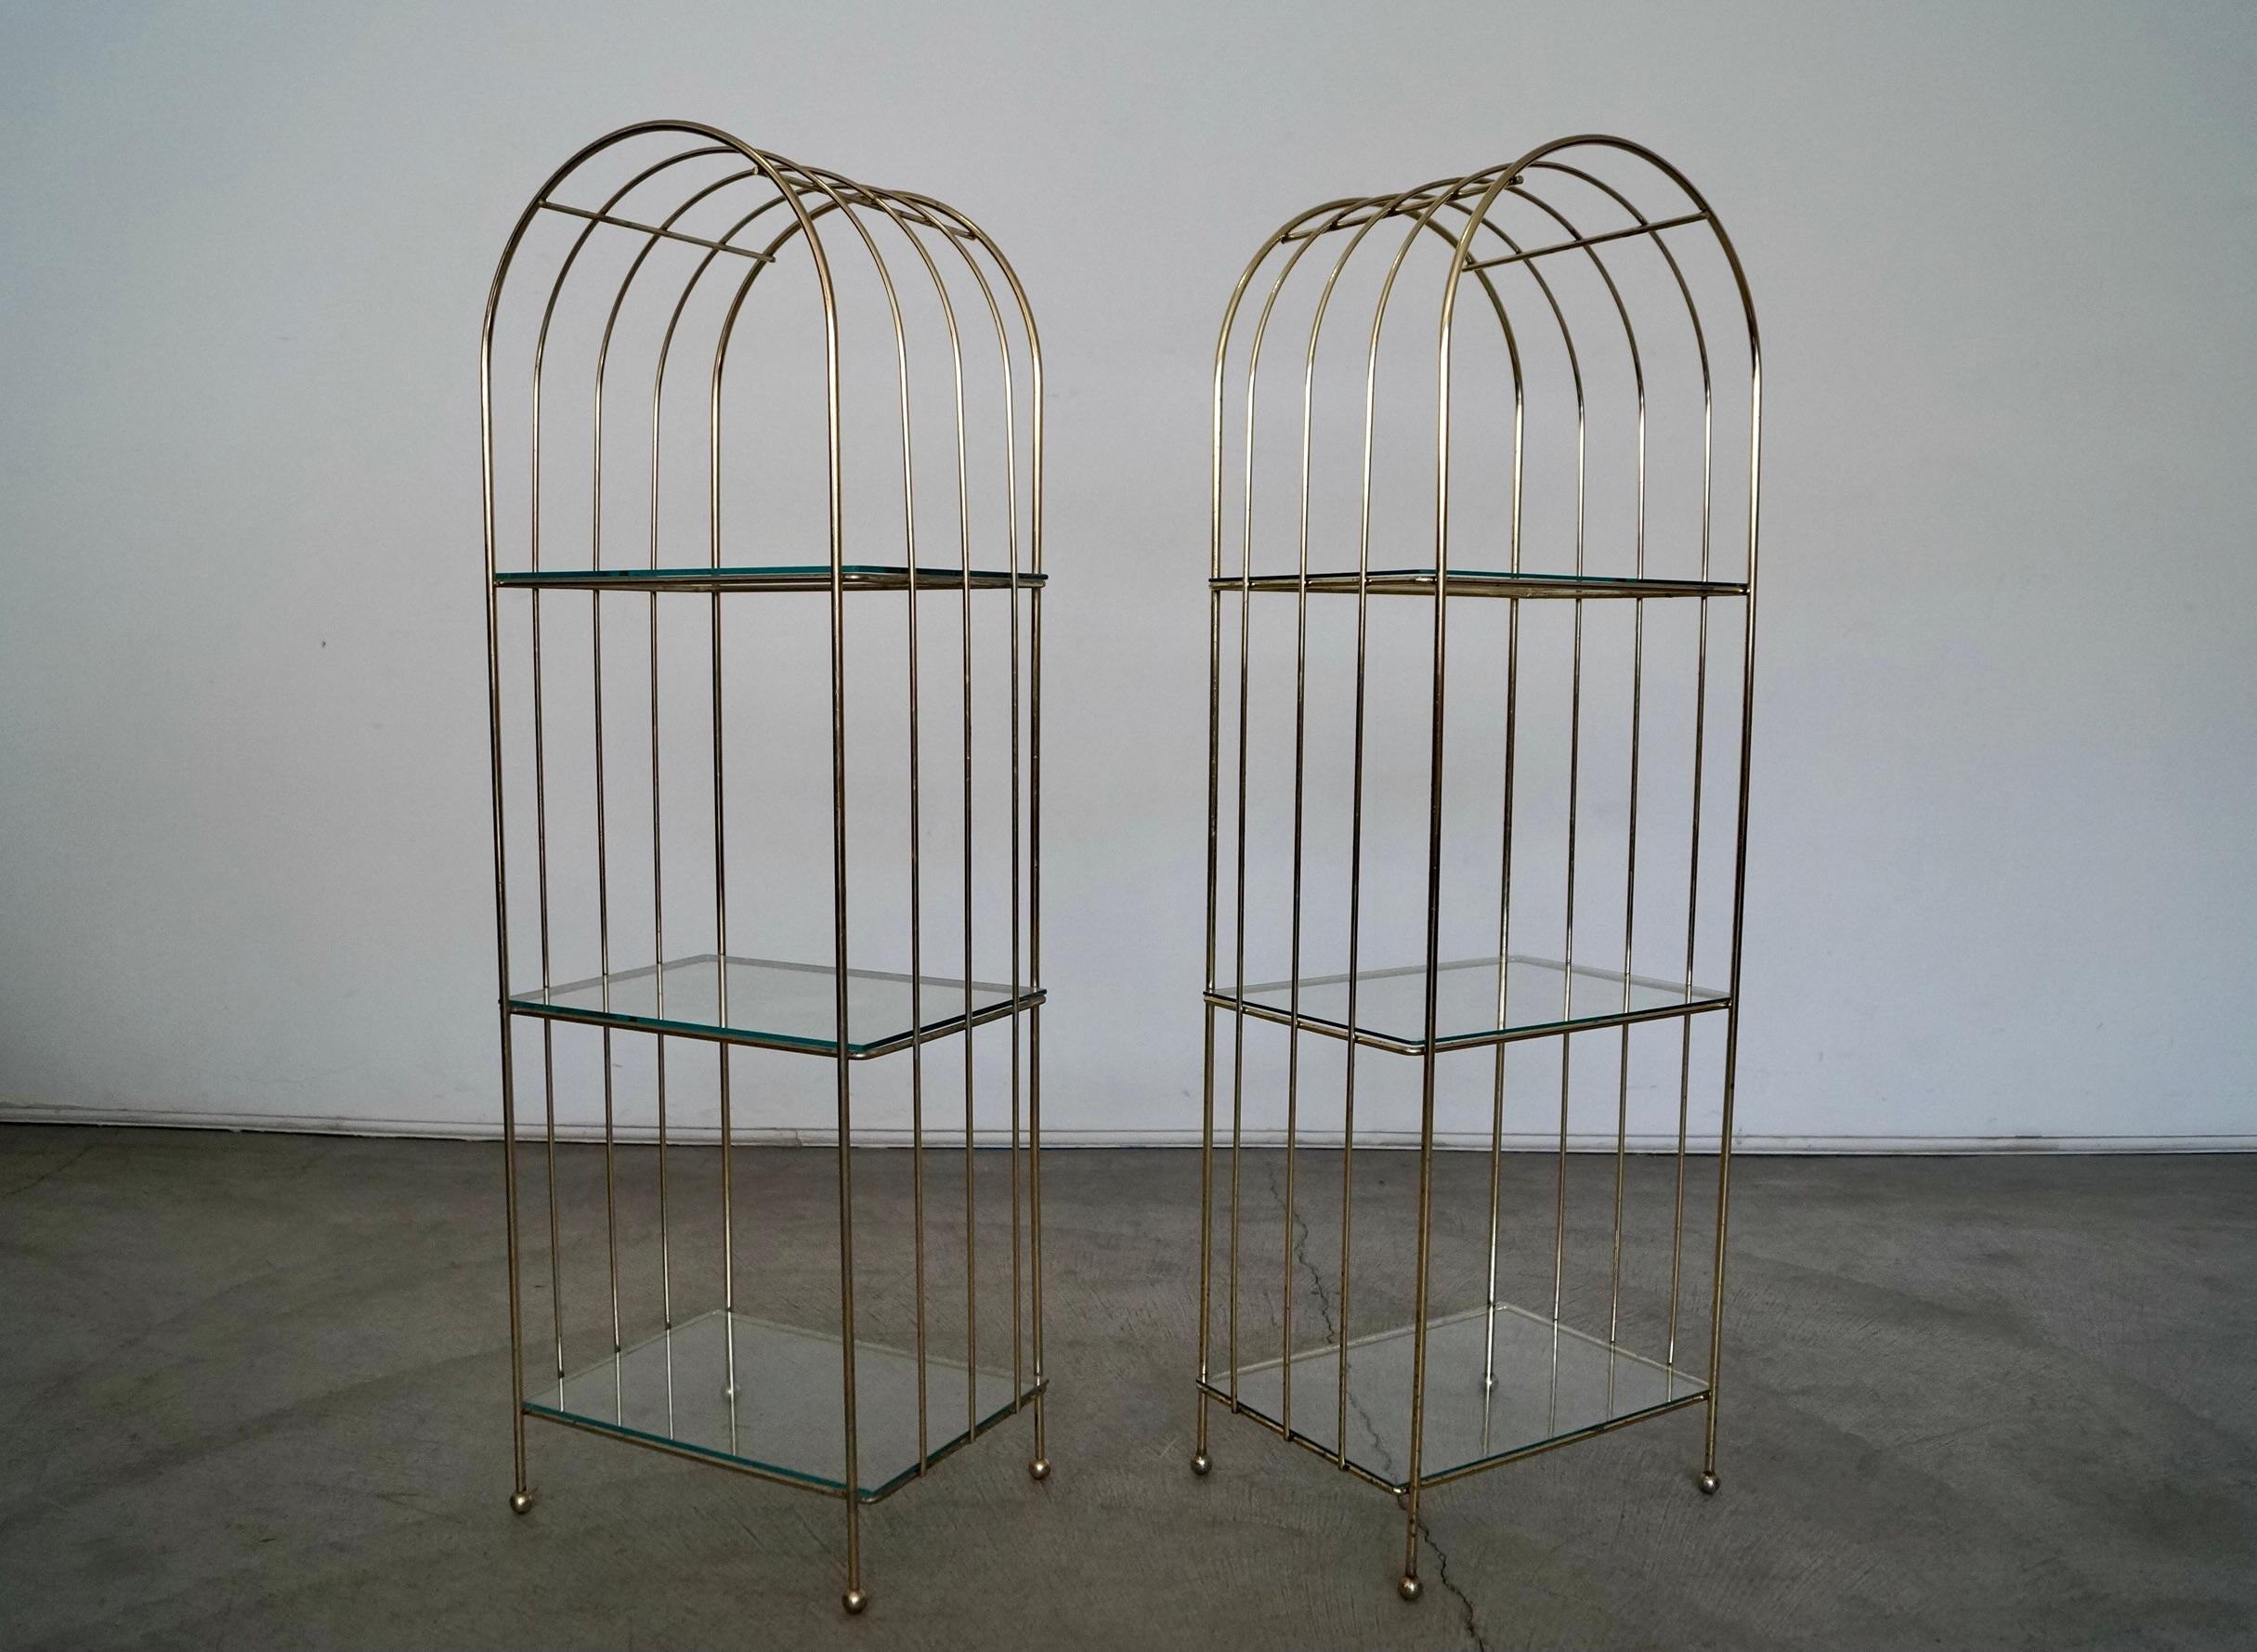 Pair of vintage Mid-Century Modern brass shelving units for sale. From the 1970's, and a beautiful Art Deco arching design in brass. Has three shelves each etagere, and can be used as a shelf or an accent piece for the bathroom for towels and the